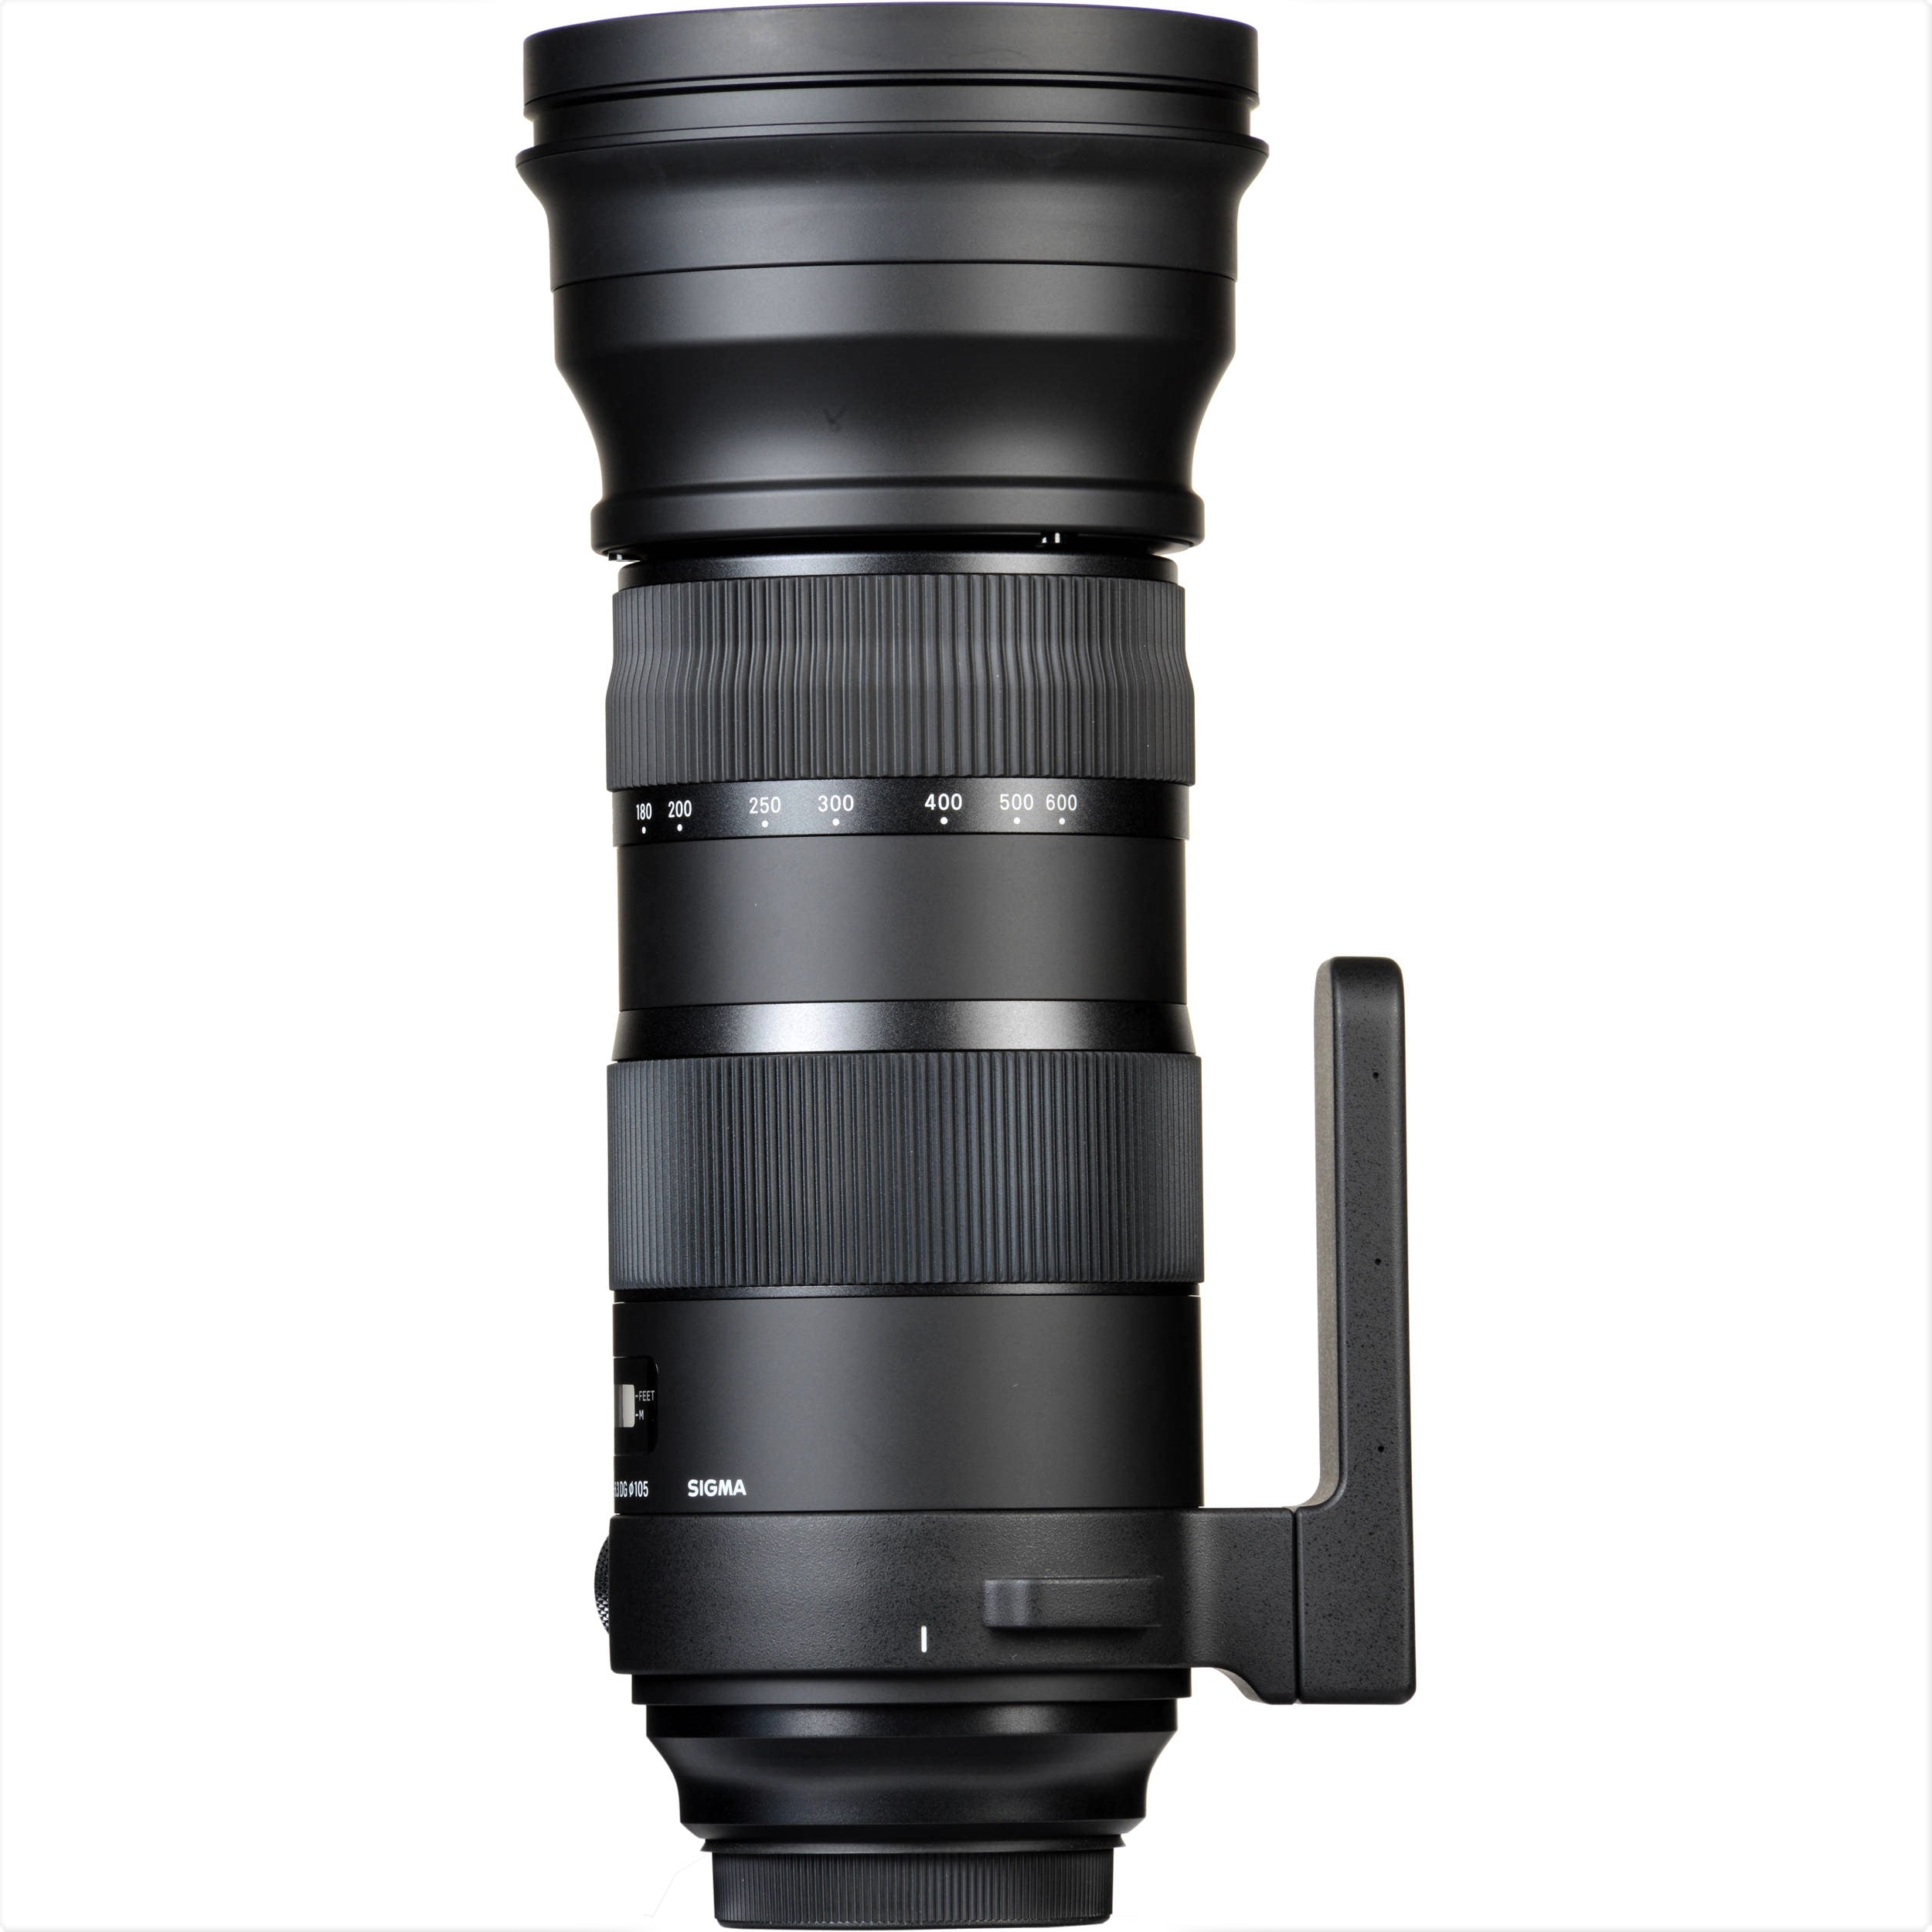 Sigma 150-600mm F5-6.3 DG OS HSM Sports Lens for Canon EF